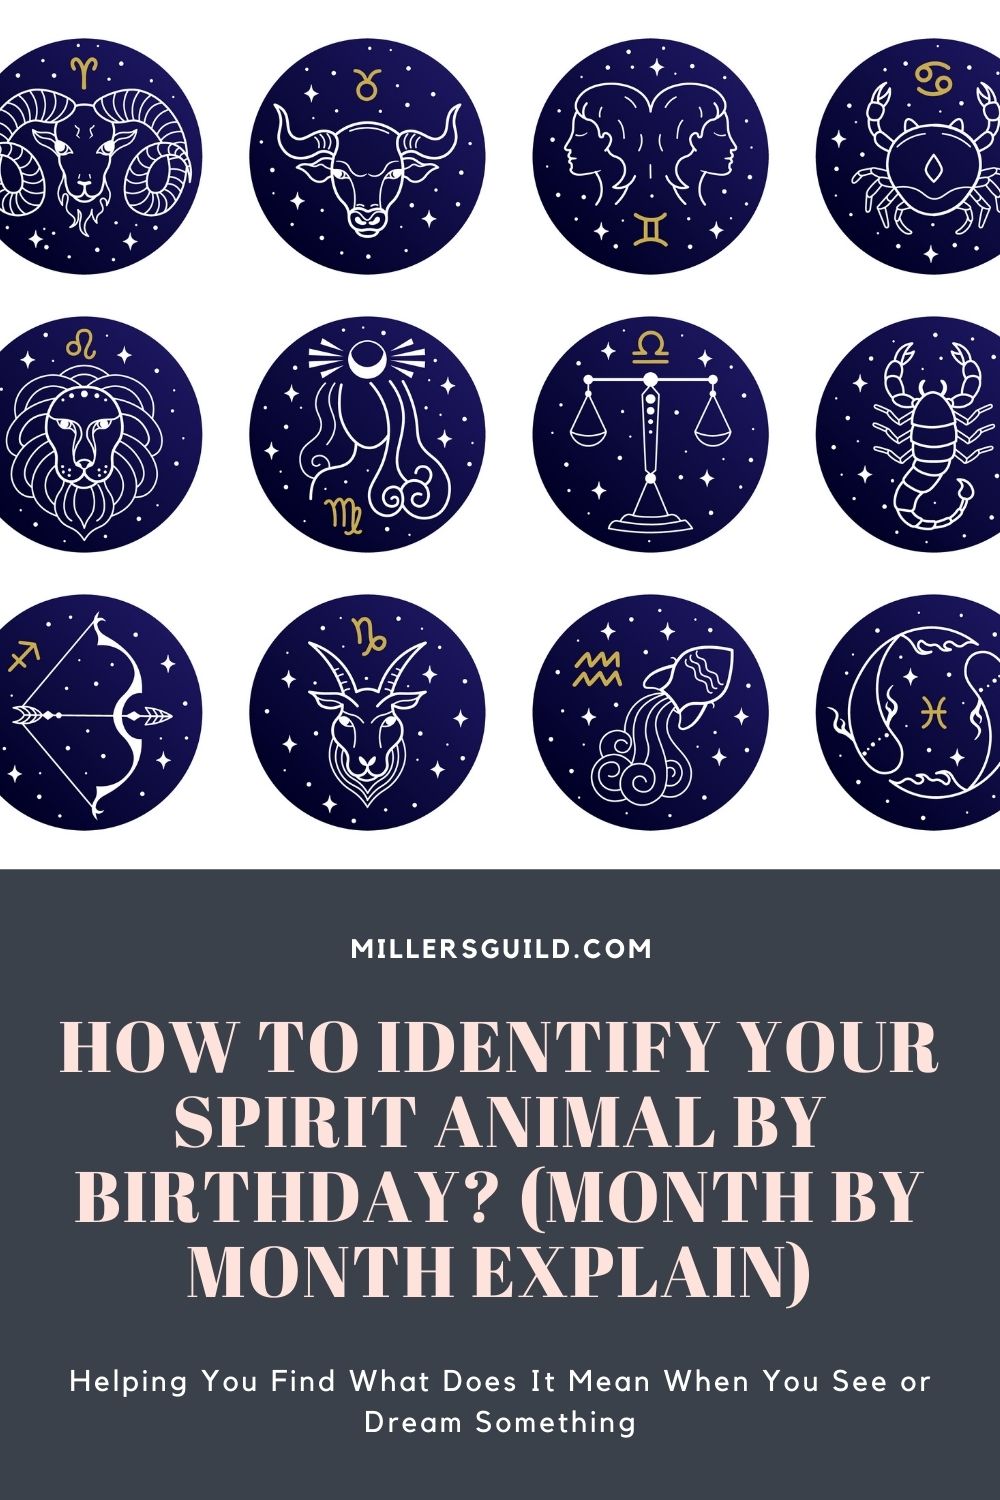 How to Identify Your Spirit Animal by Birthday? (Month by Month Explain)